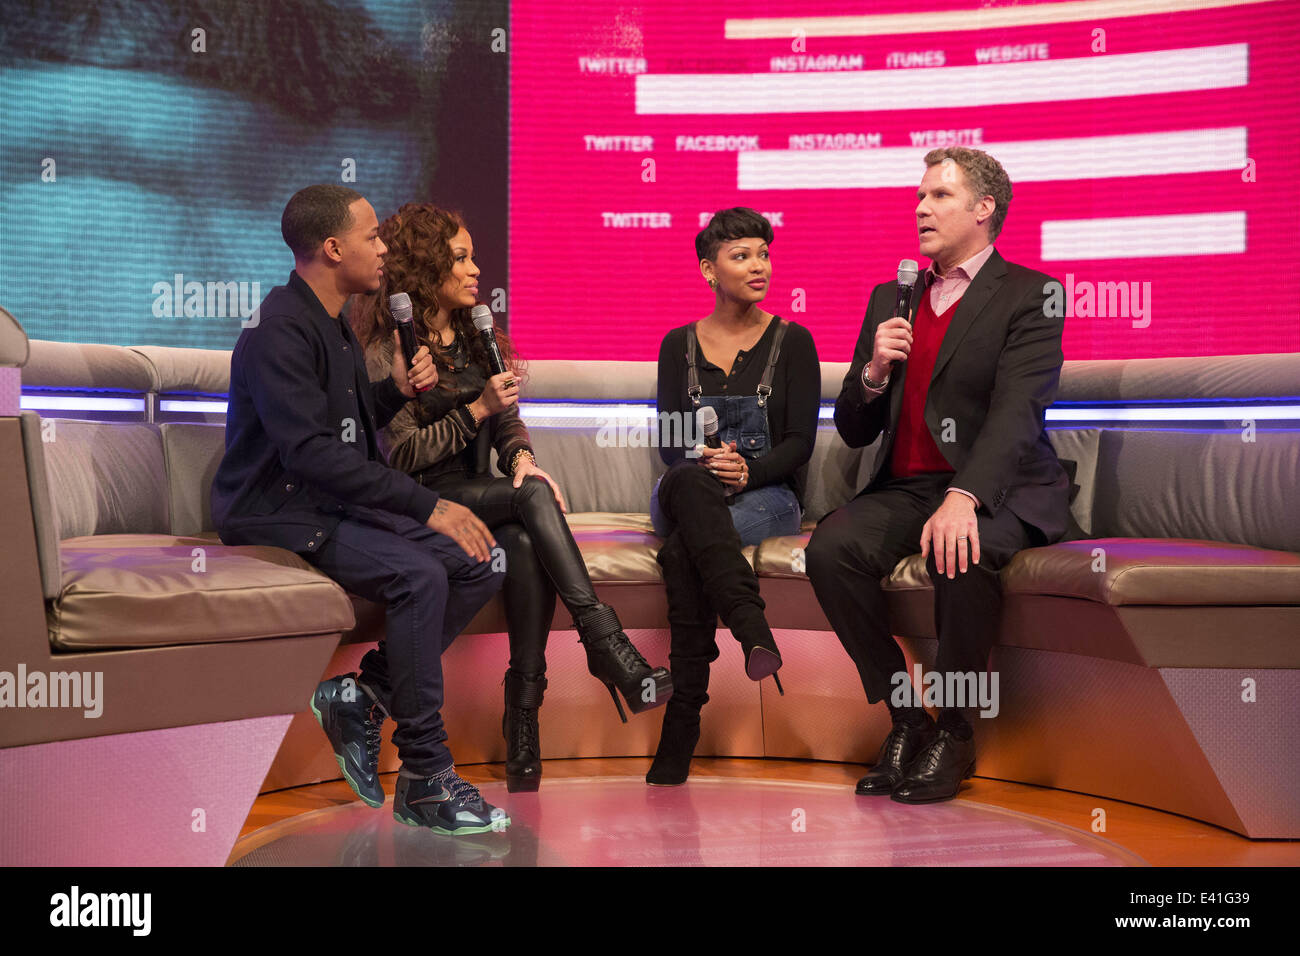 BET's 106 & Park show host guest stars Will Ferrell and Meagan Good to promote new movie Anchorman II  Featuring: Bow Wow,Keshia Chanté,Meagan Good Where: New York, New York, United States When: 17 Dec 2013 Stock Photo